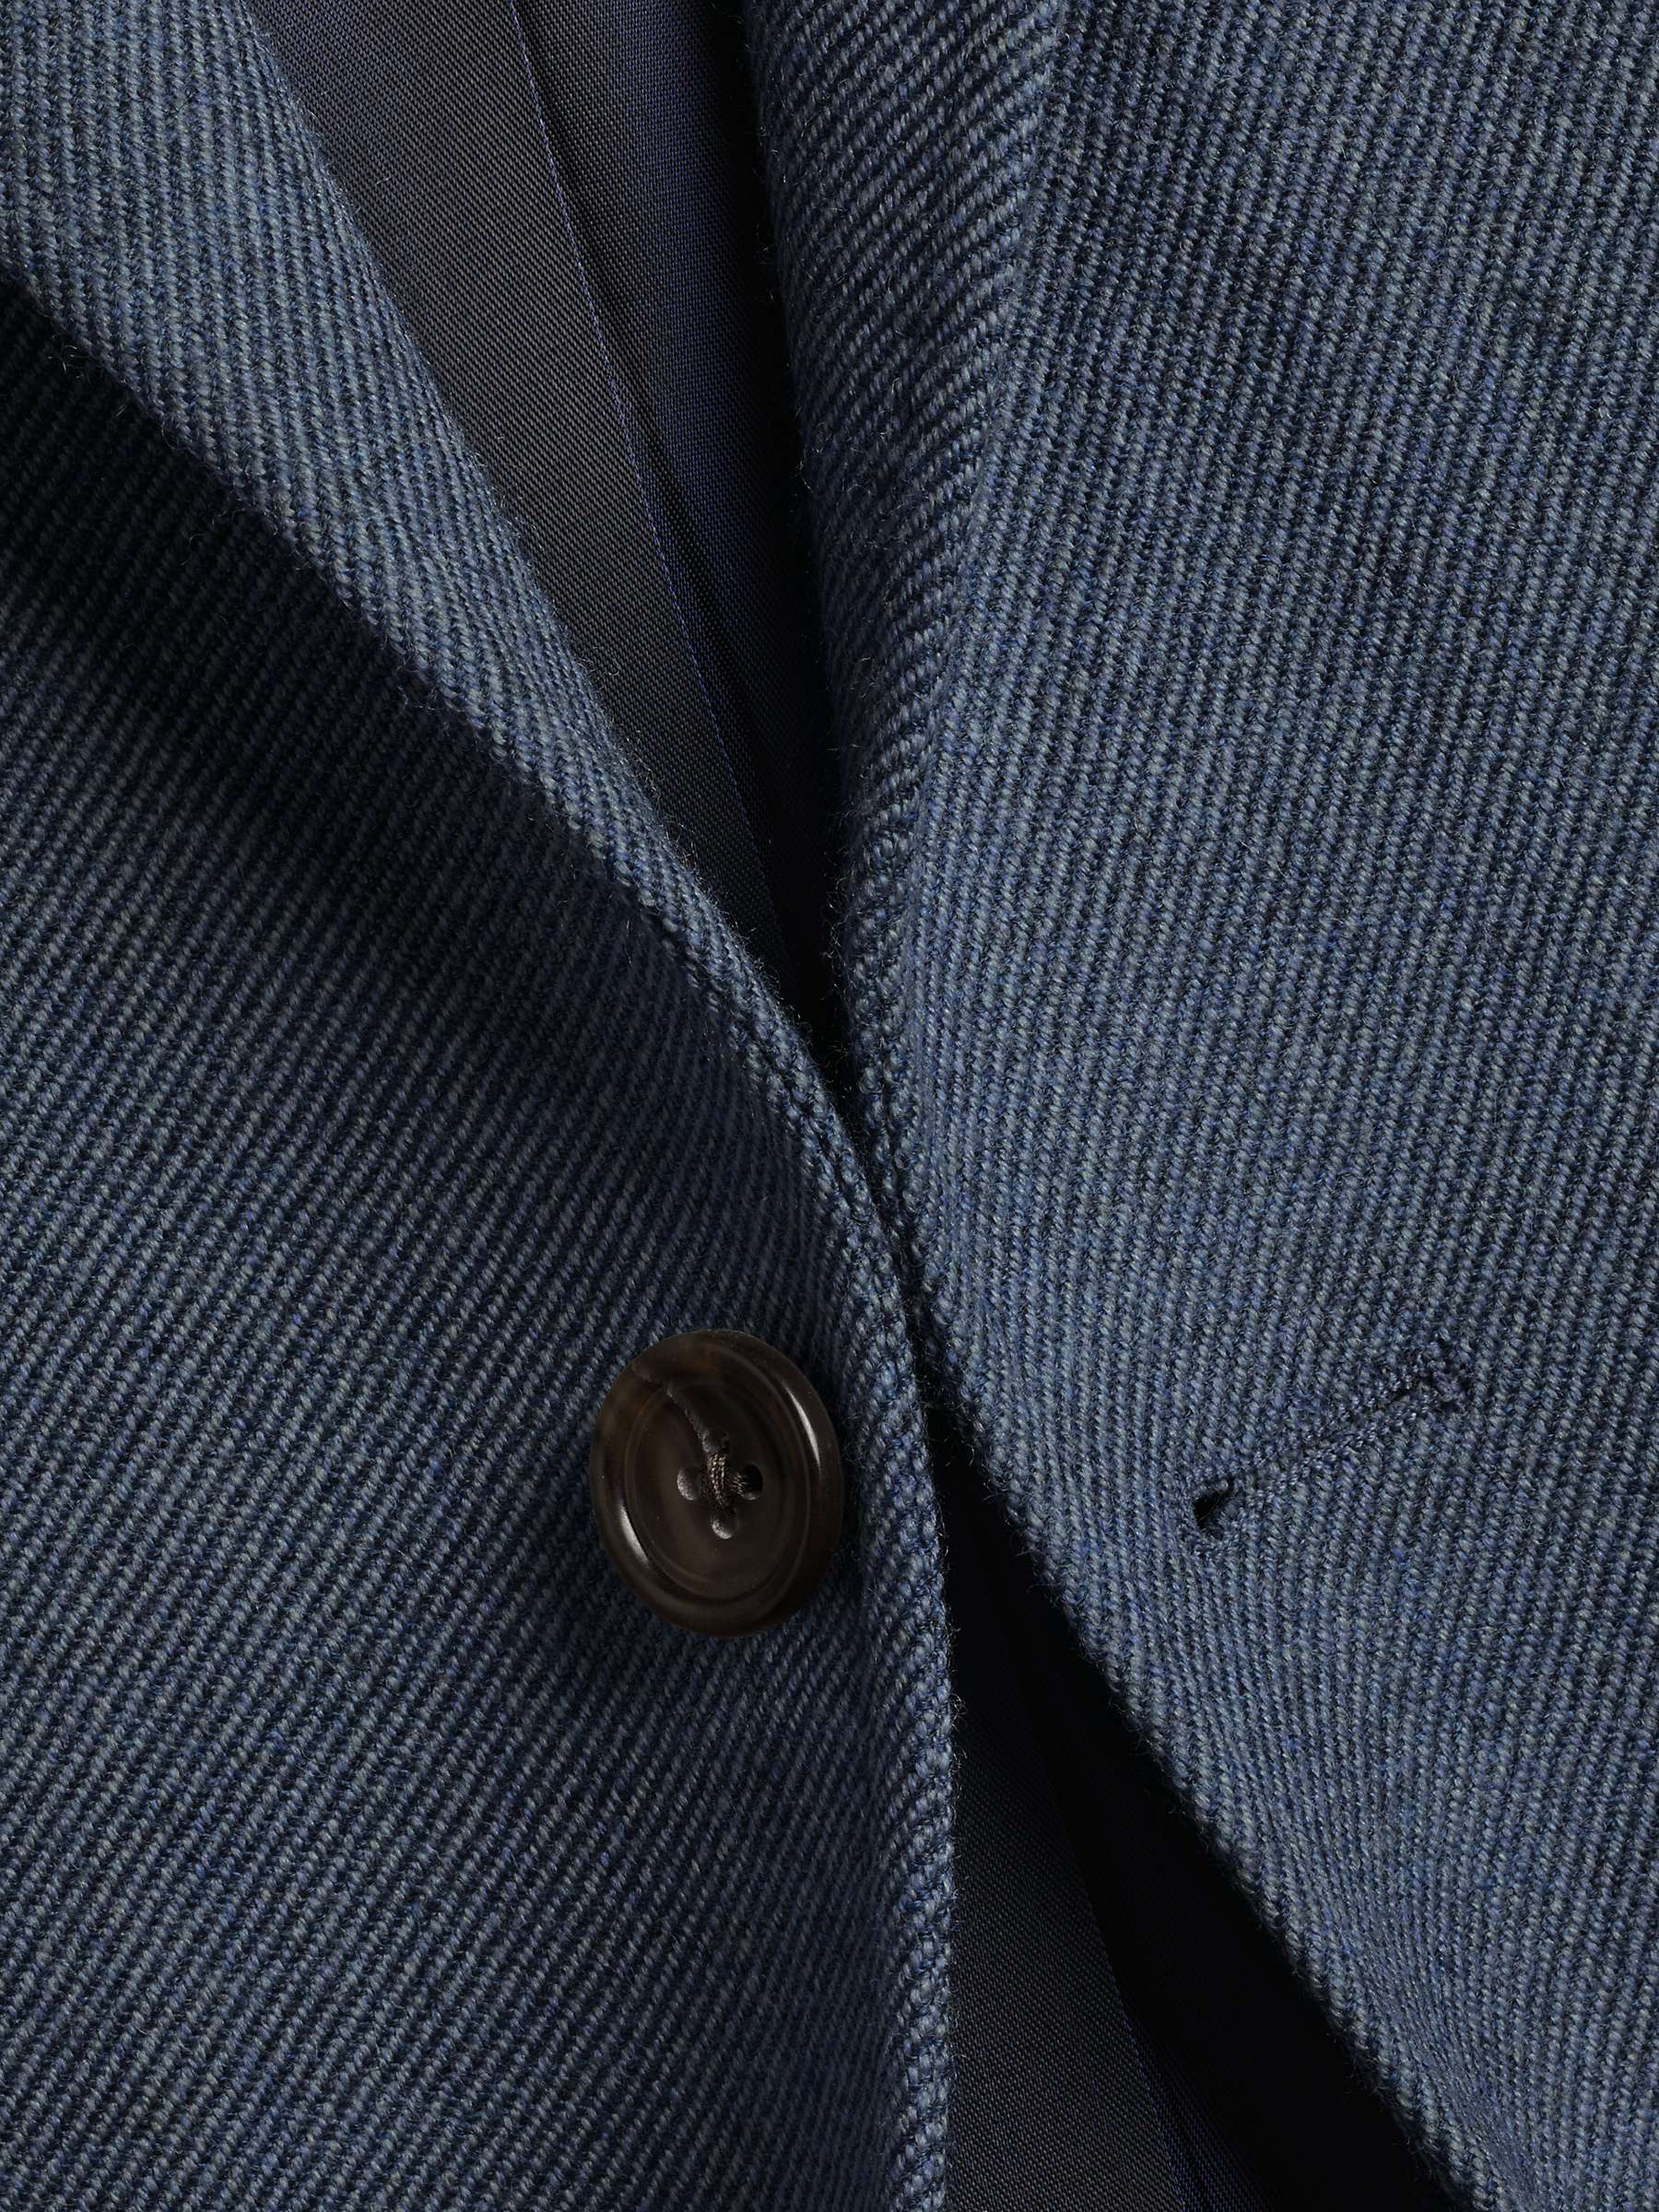 Buy Charles Tyrwhitt Classic fit Wool Twill Texture Jacket, Mid Blue Online at johnlewis.com